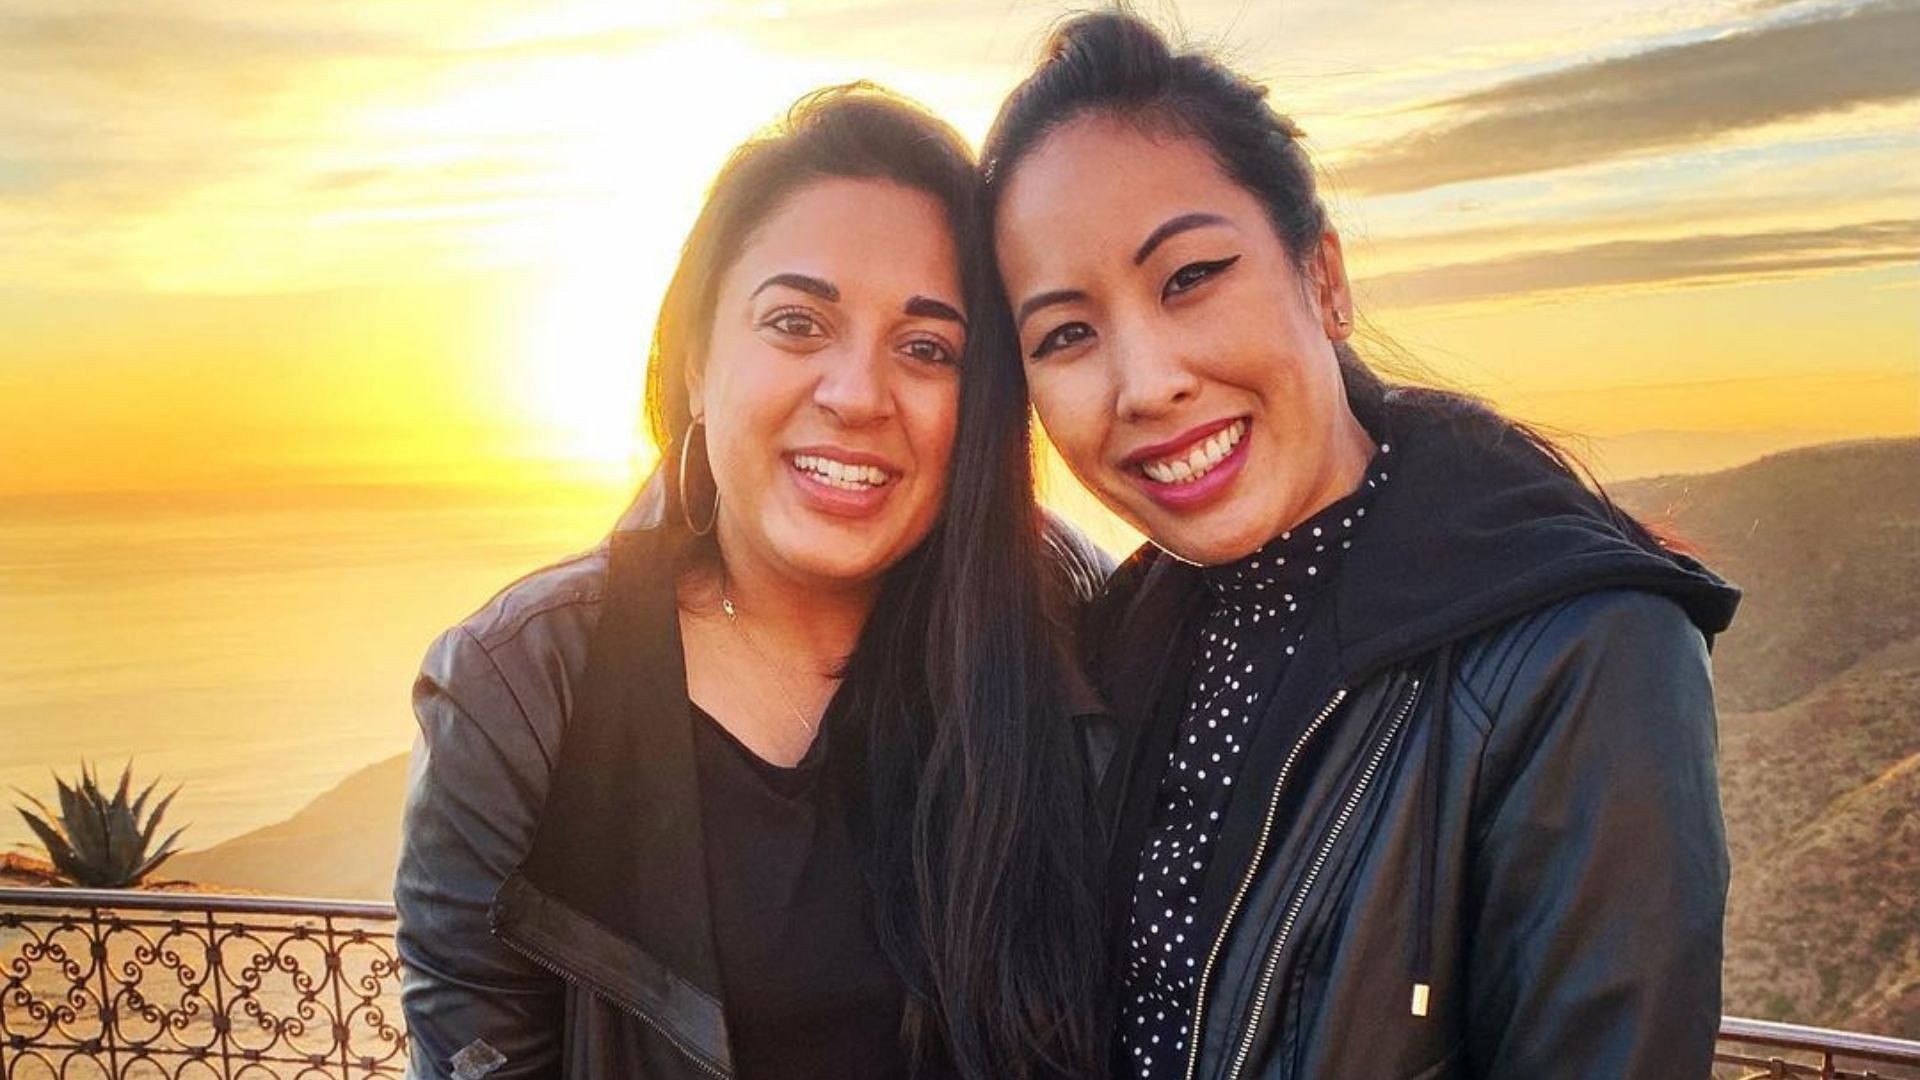 Aastha Lal and Nina Duong to participate in The Amazing Race airing September 21 (Image via aastha.lal/Instagram)